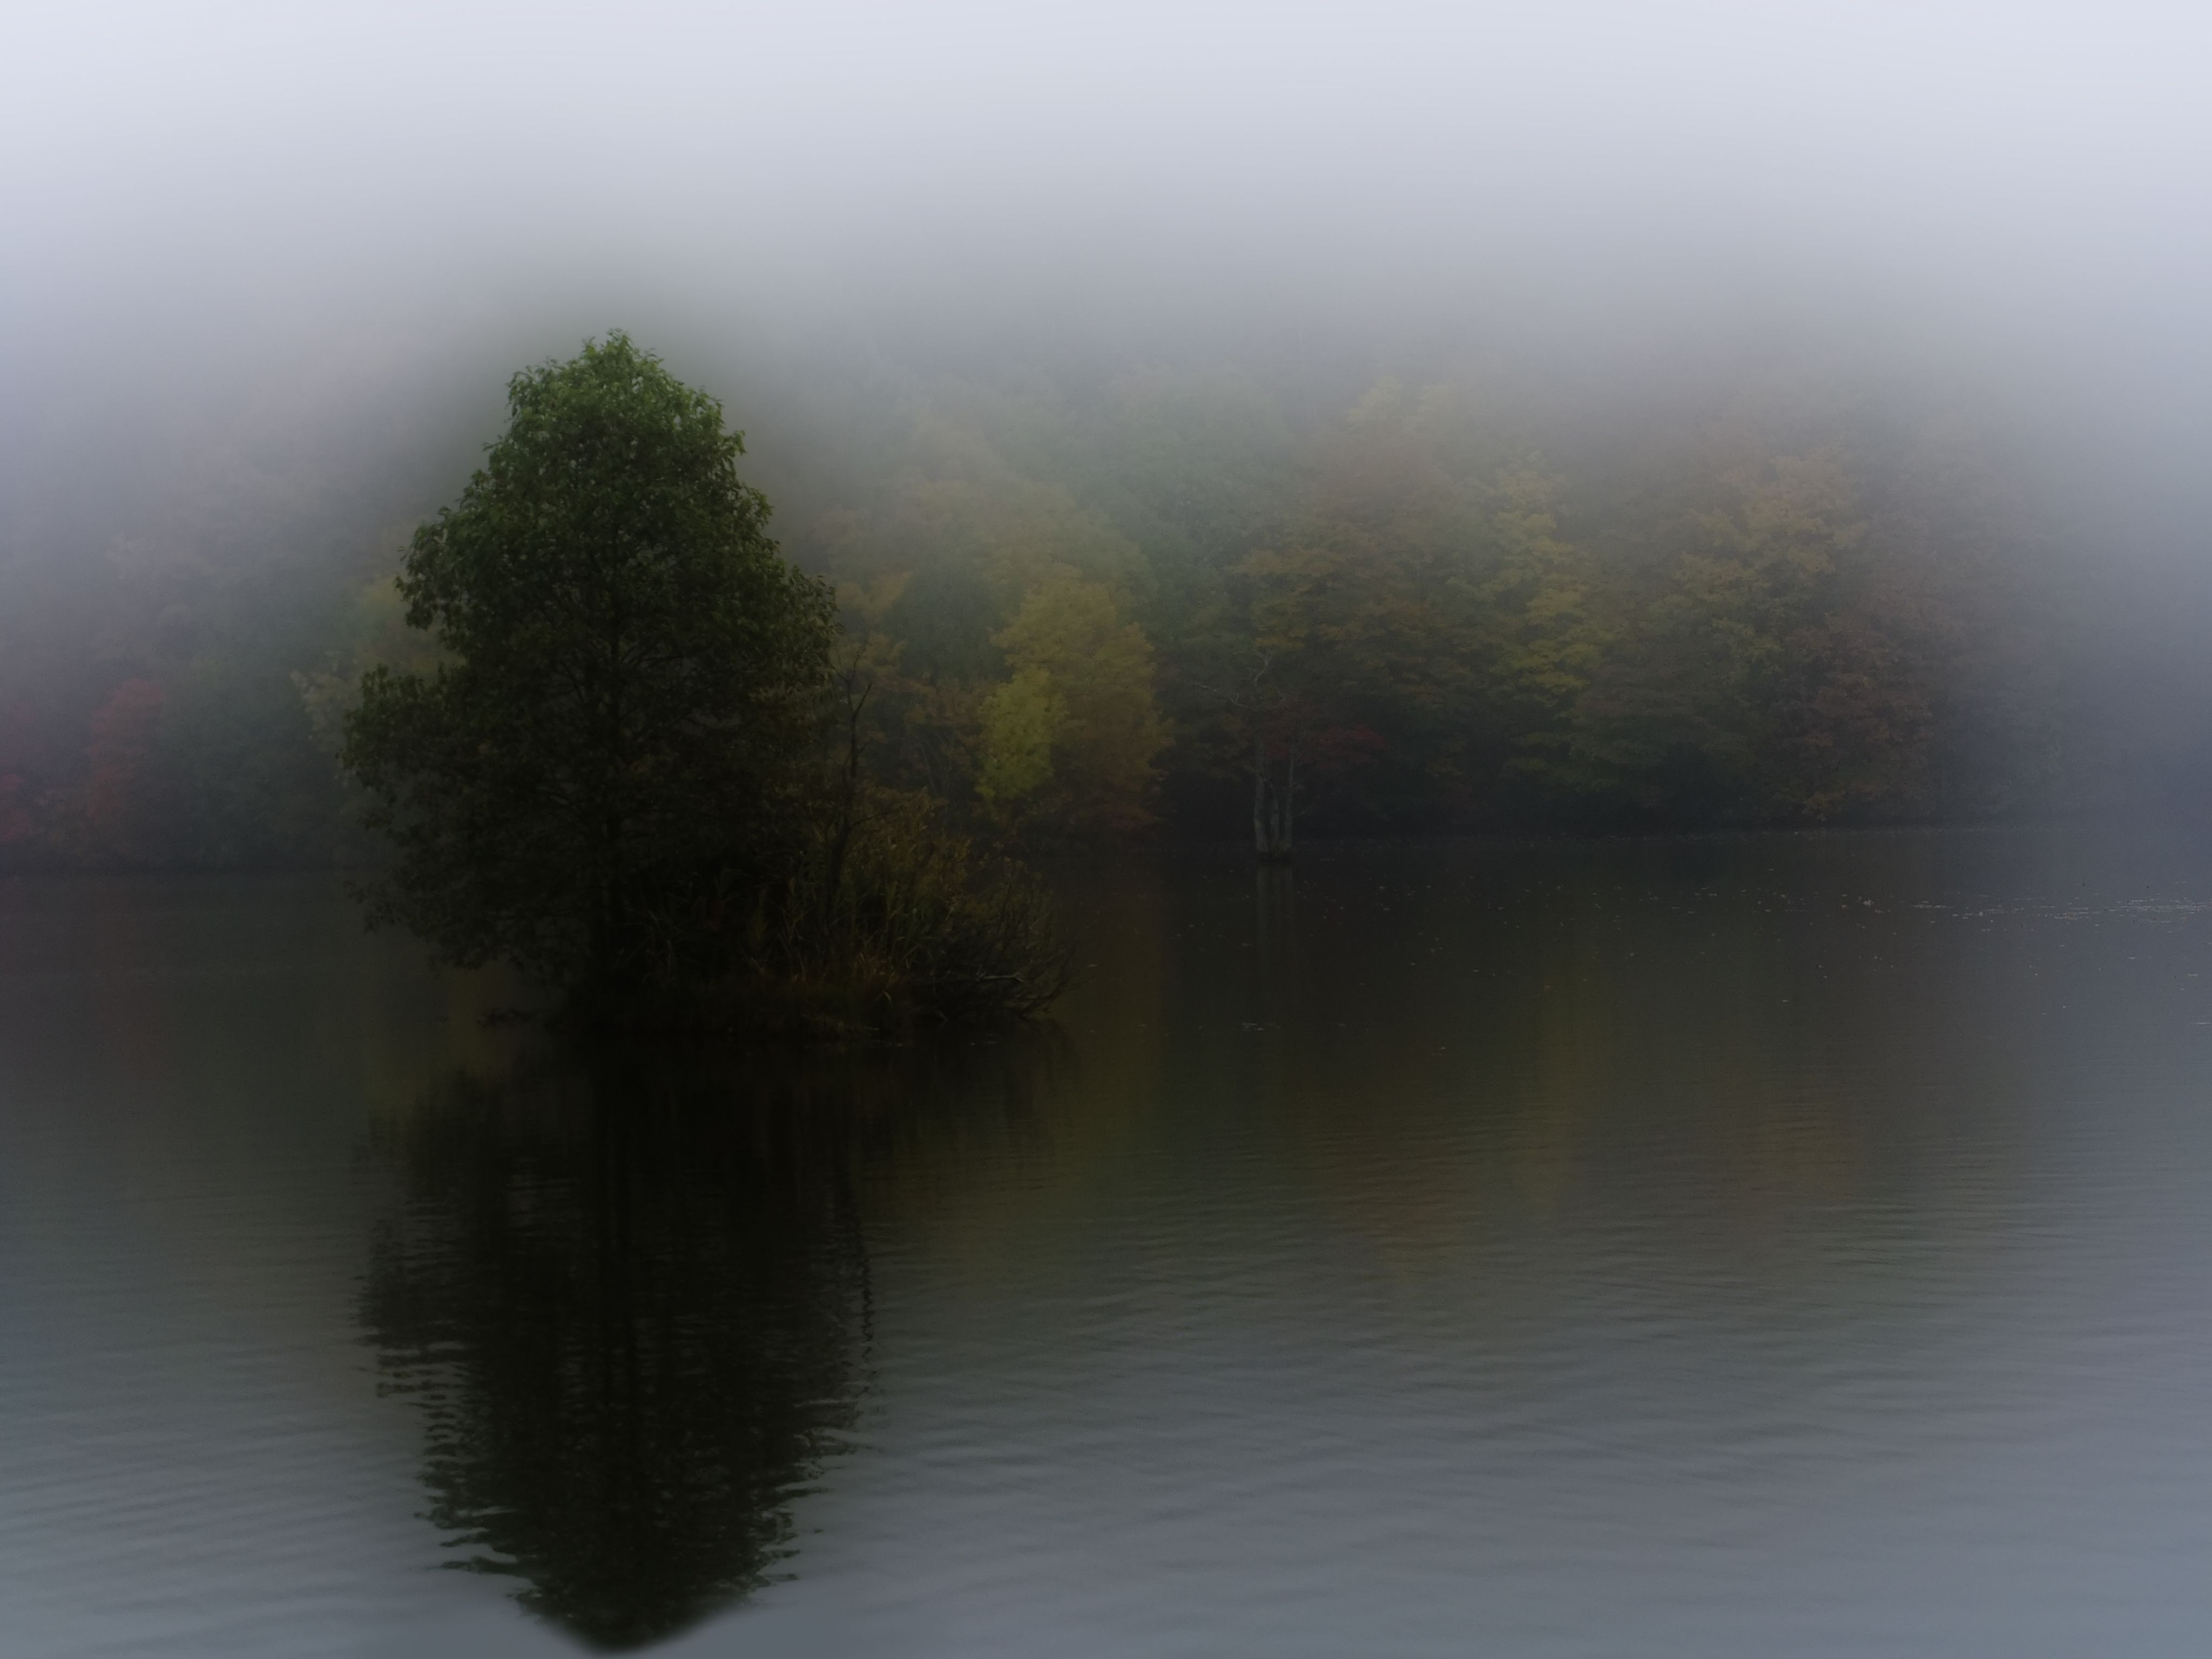 A landscape shot of an evergreen and deciduous forest in autum. The trees are in fog